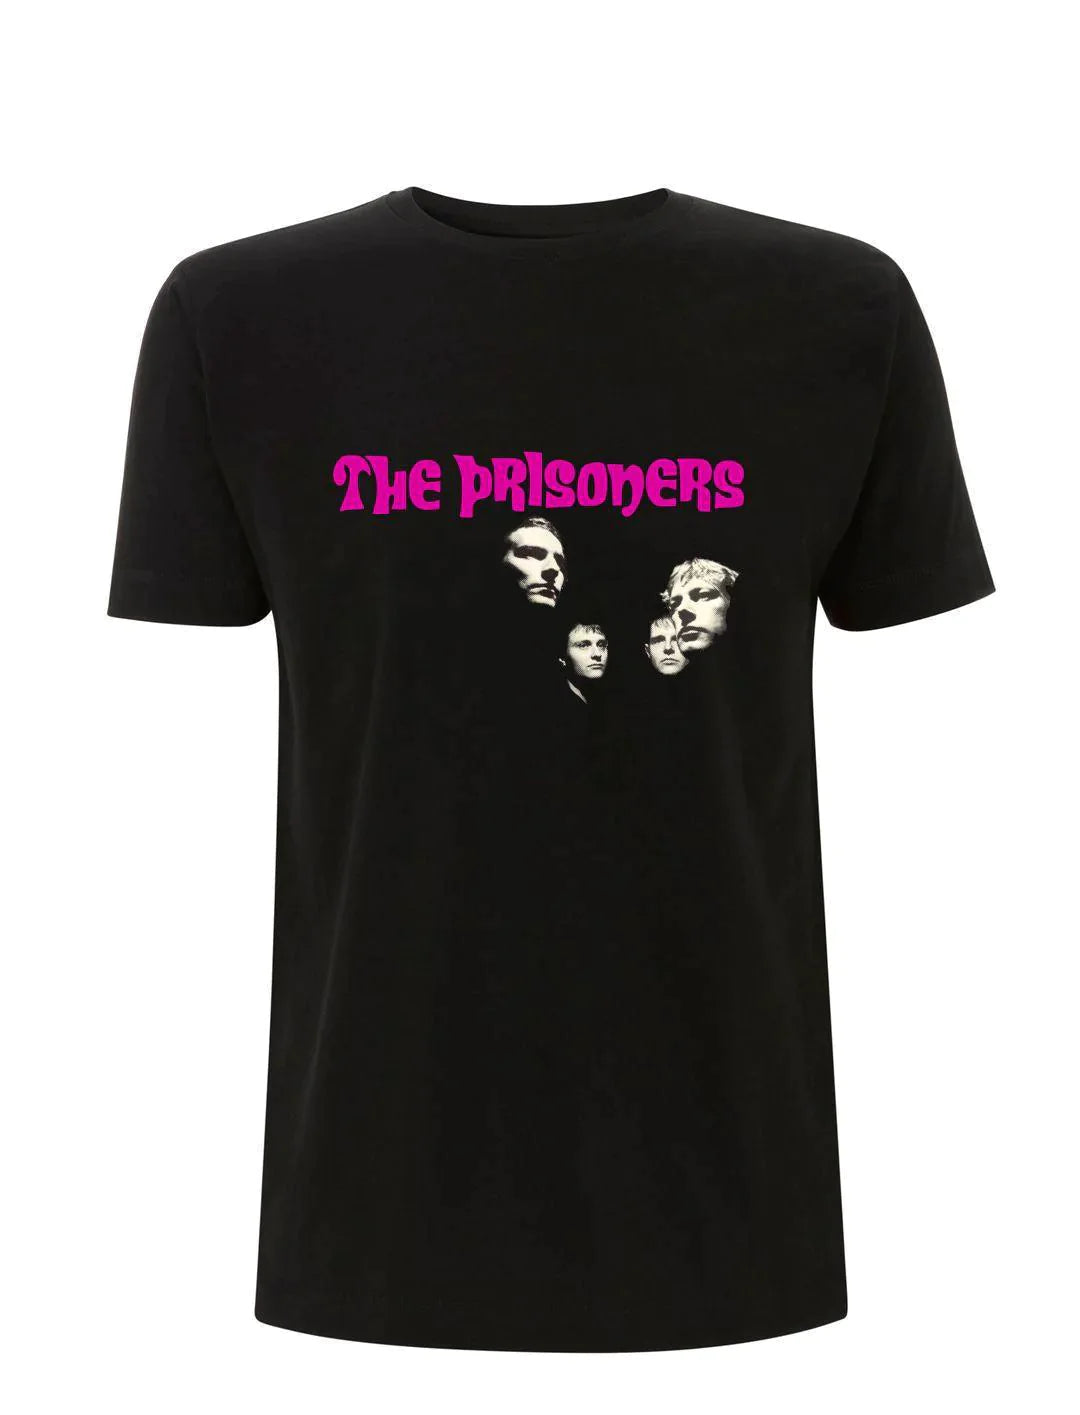 THE PRISONERS: WHENEVER I'M GONE: T-Shirt Official Merchandise by Sound is Colour. - SOUND IS COLOUR